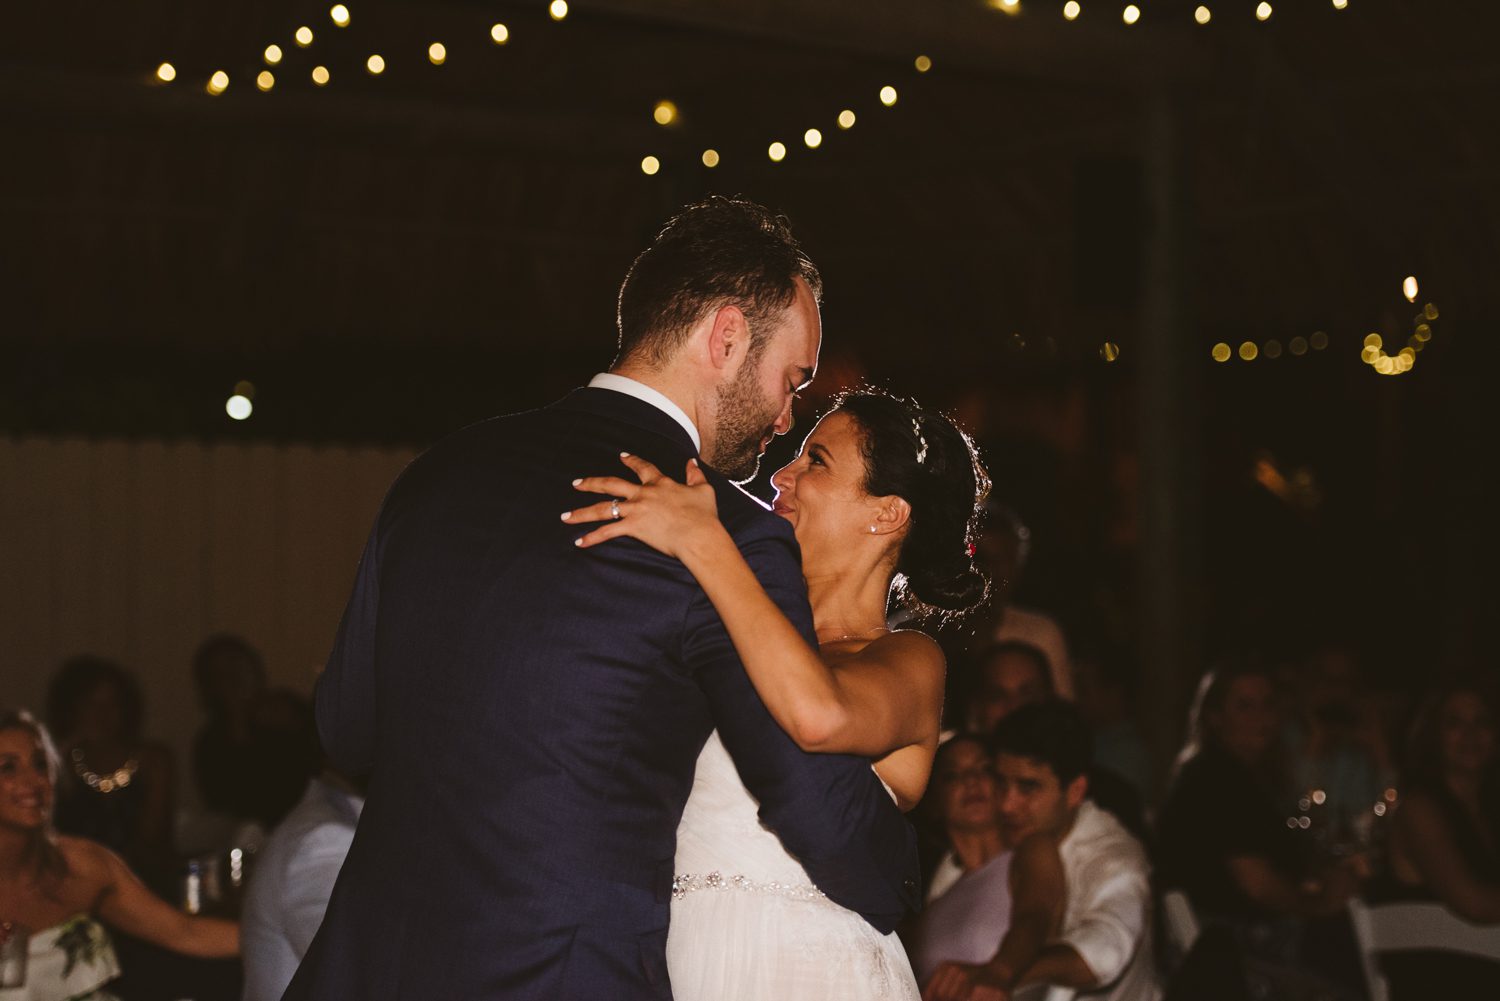 A bride and groom sharing their first dance at their Florida Keys wedding.